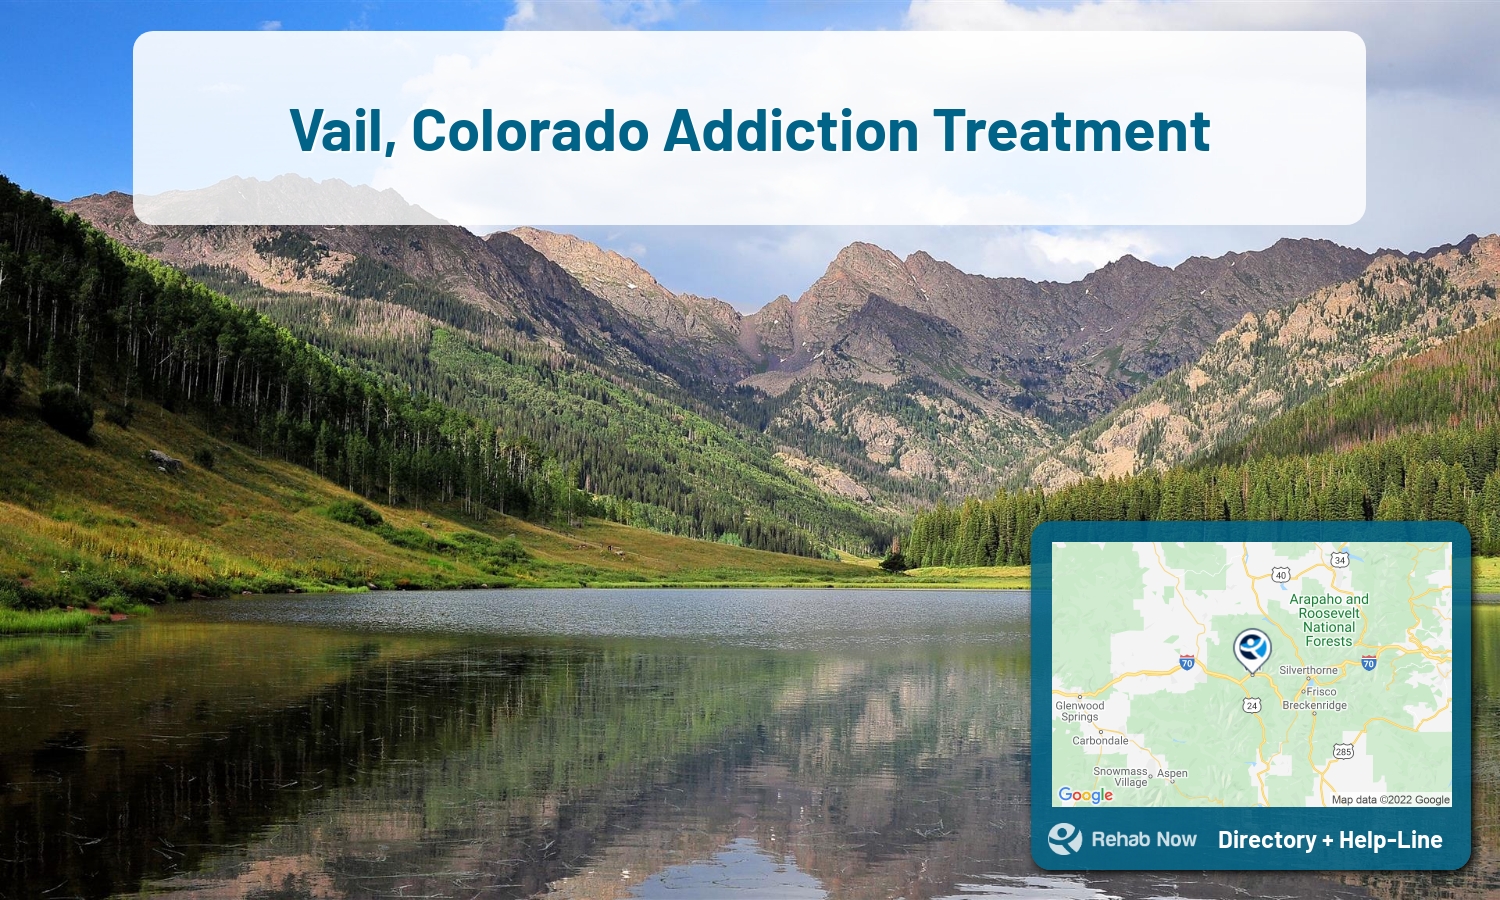 Let our expert counselors help find the best addiction treatment in Vail, Colorado now with a free call to our hotline.